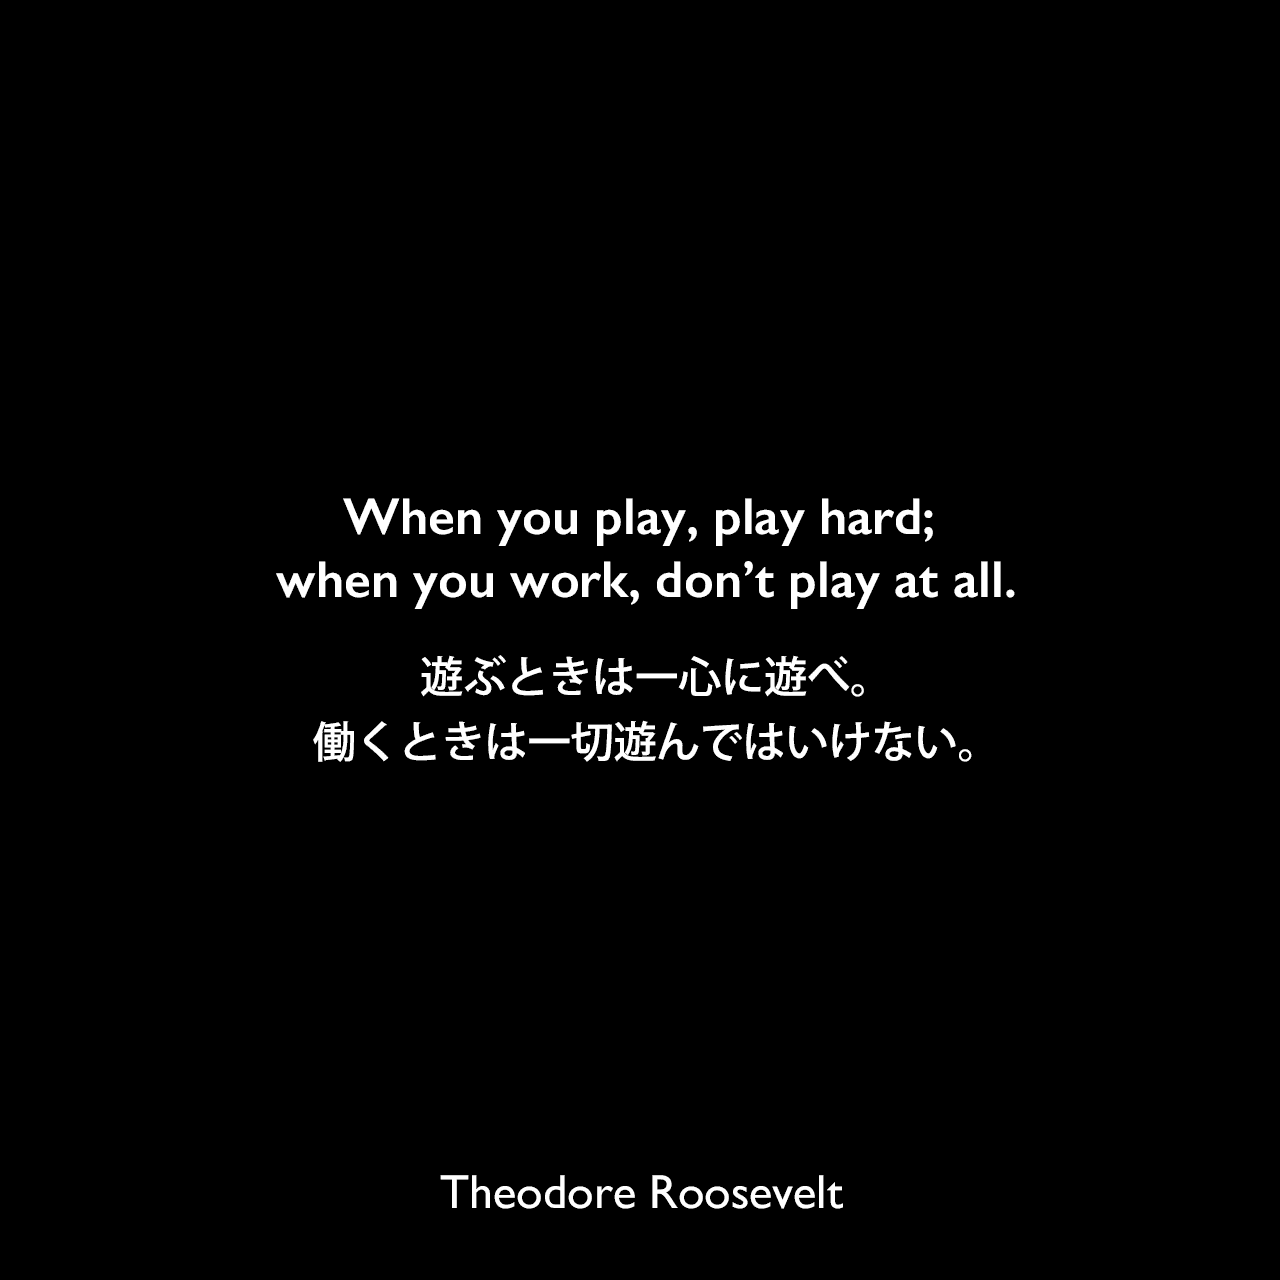 When you play, play hard; when you work, don’t play at all.遊ぶときは一心に遊べ。働くときは一切遊んではいけない。Theodore Roosevelt